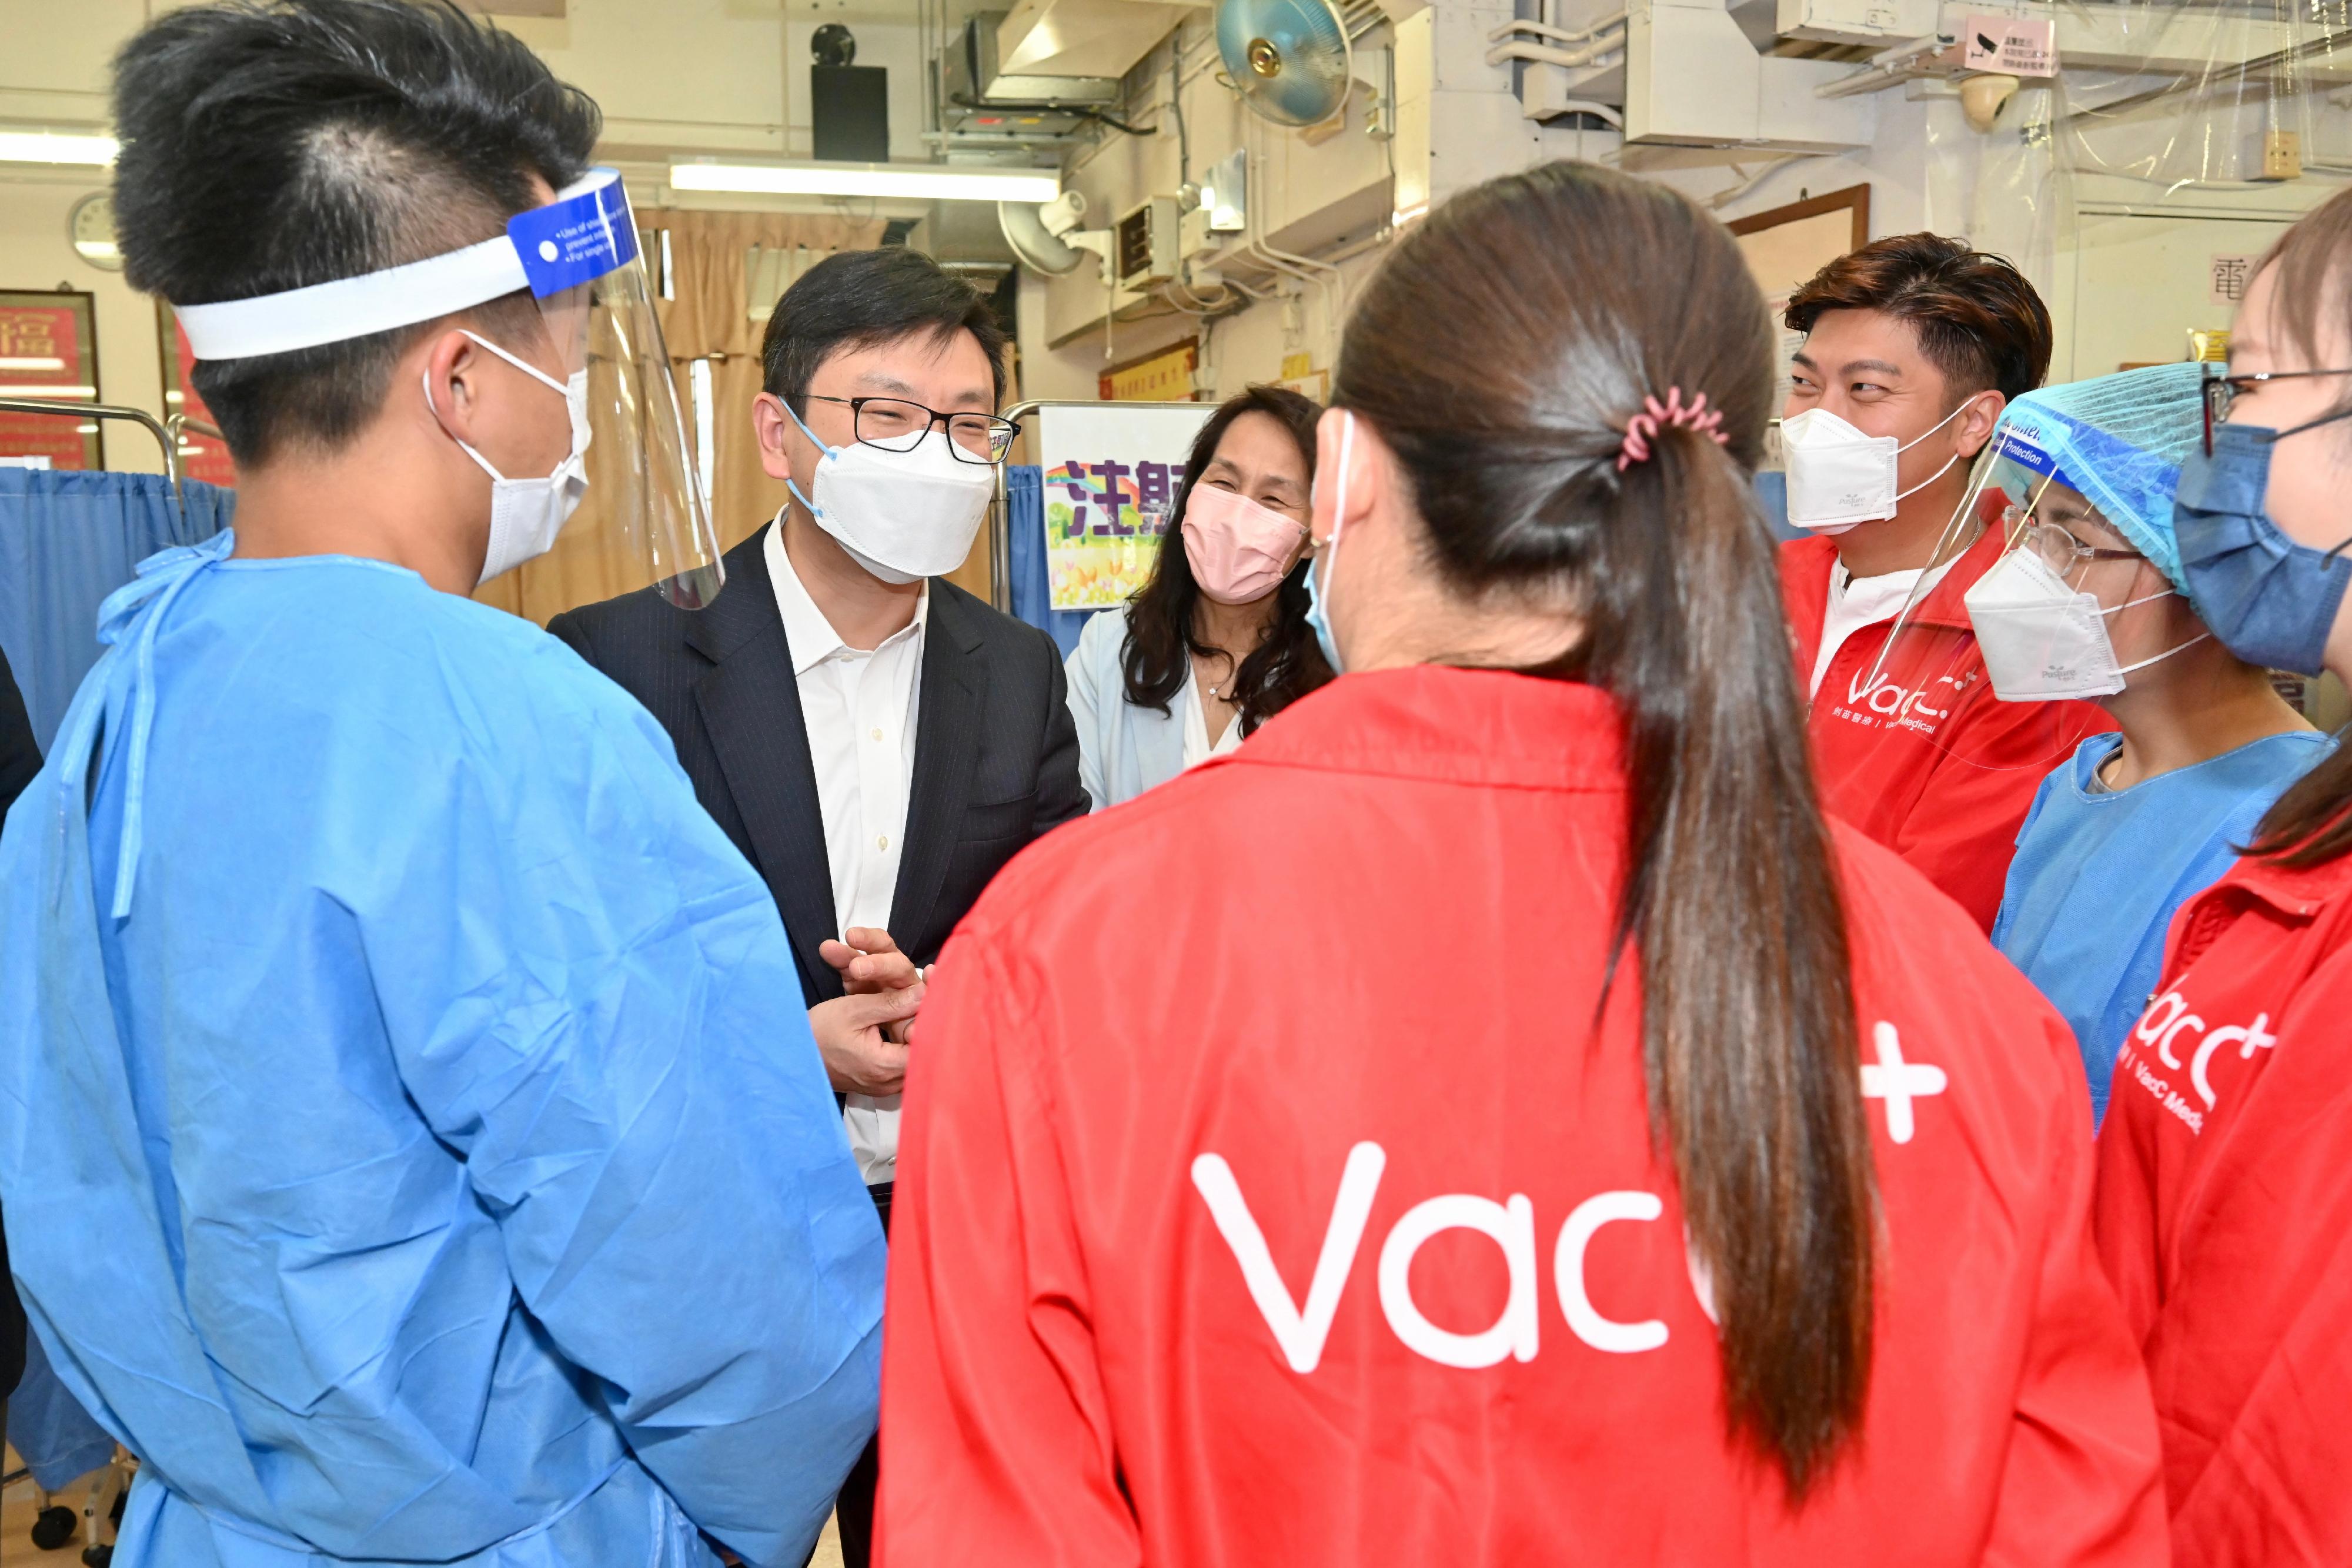 The Secretary for Labour and Welfare, Mr Chris Sun, today (July 5) inspected a COVID-19 vaccination day at a residential care home for the elderly in Ho Man Tin to take a closer look at the latest progress of outreach vaccination for residential care homes. Photo shows Mr Sun (second left) showing appreciation to healthcare workers taking part in outreach vaccination for residential care homes.